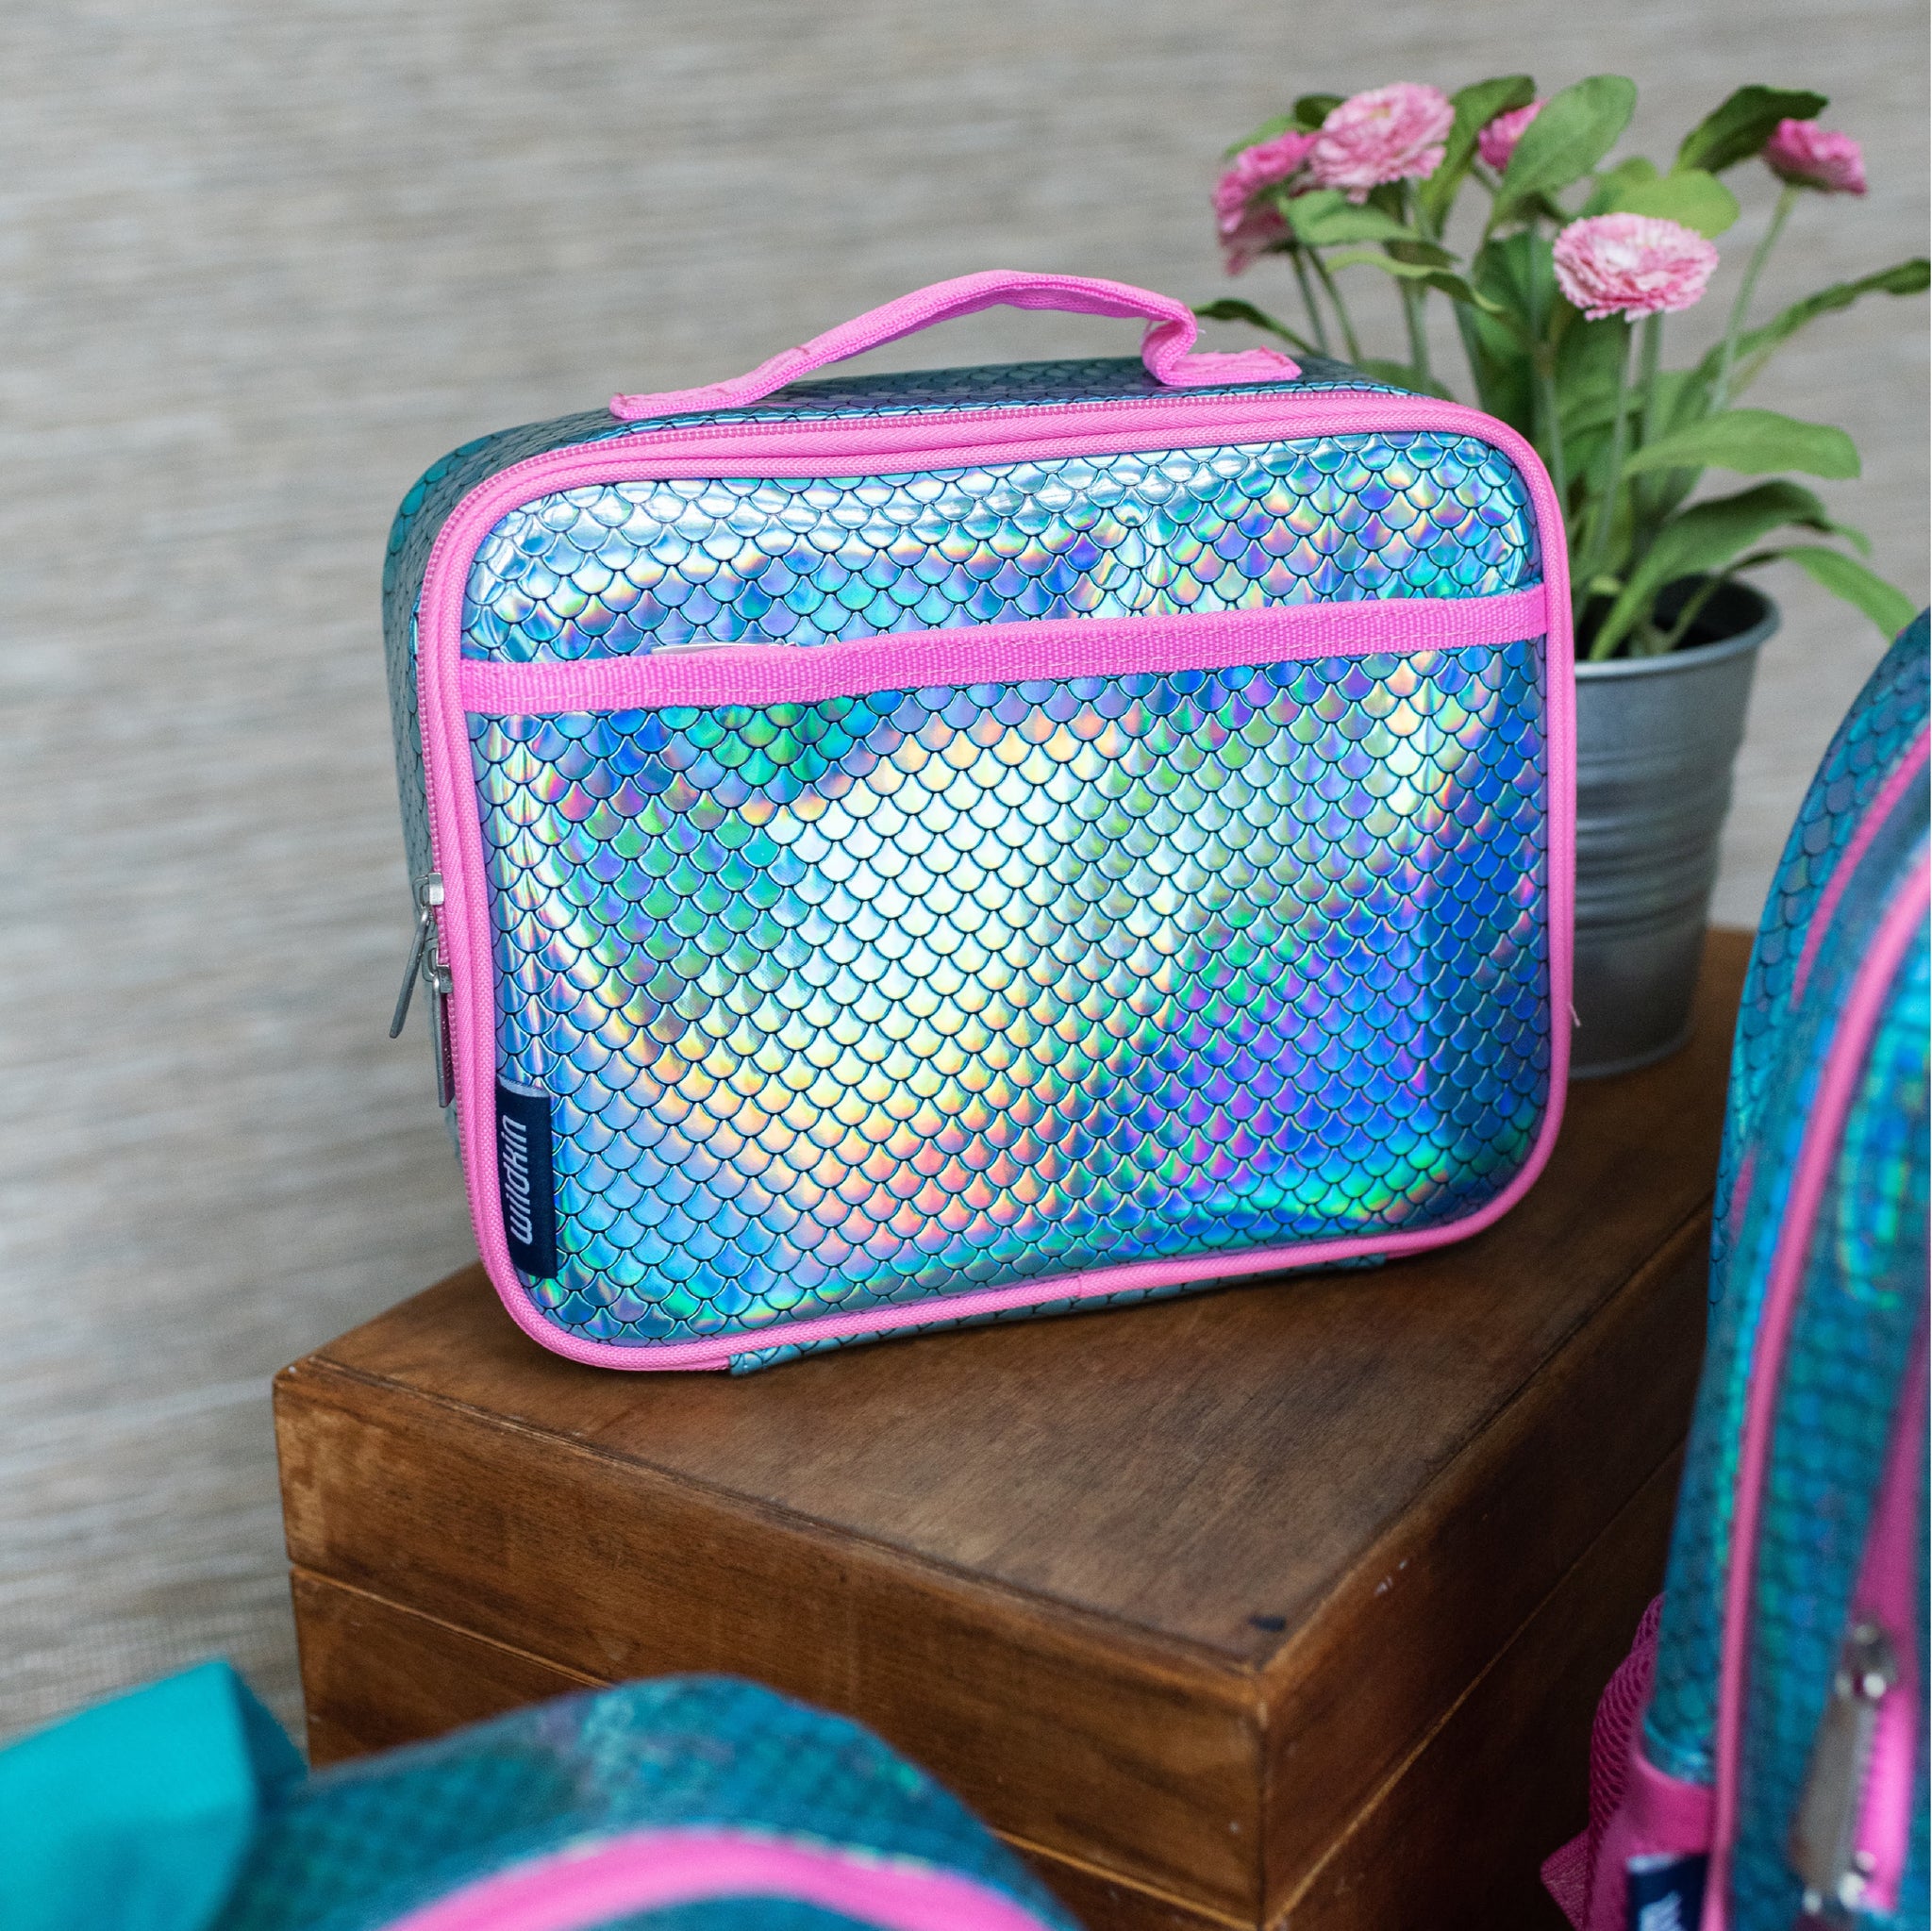 Mermaid Scales Two Compartment Lunch Bag Blue